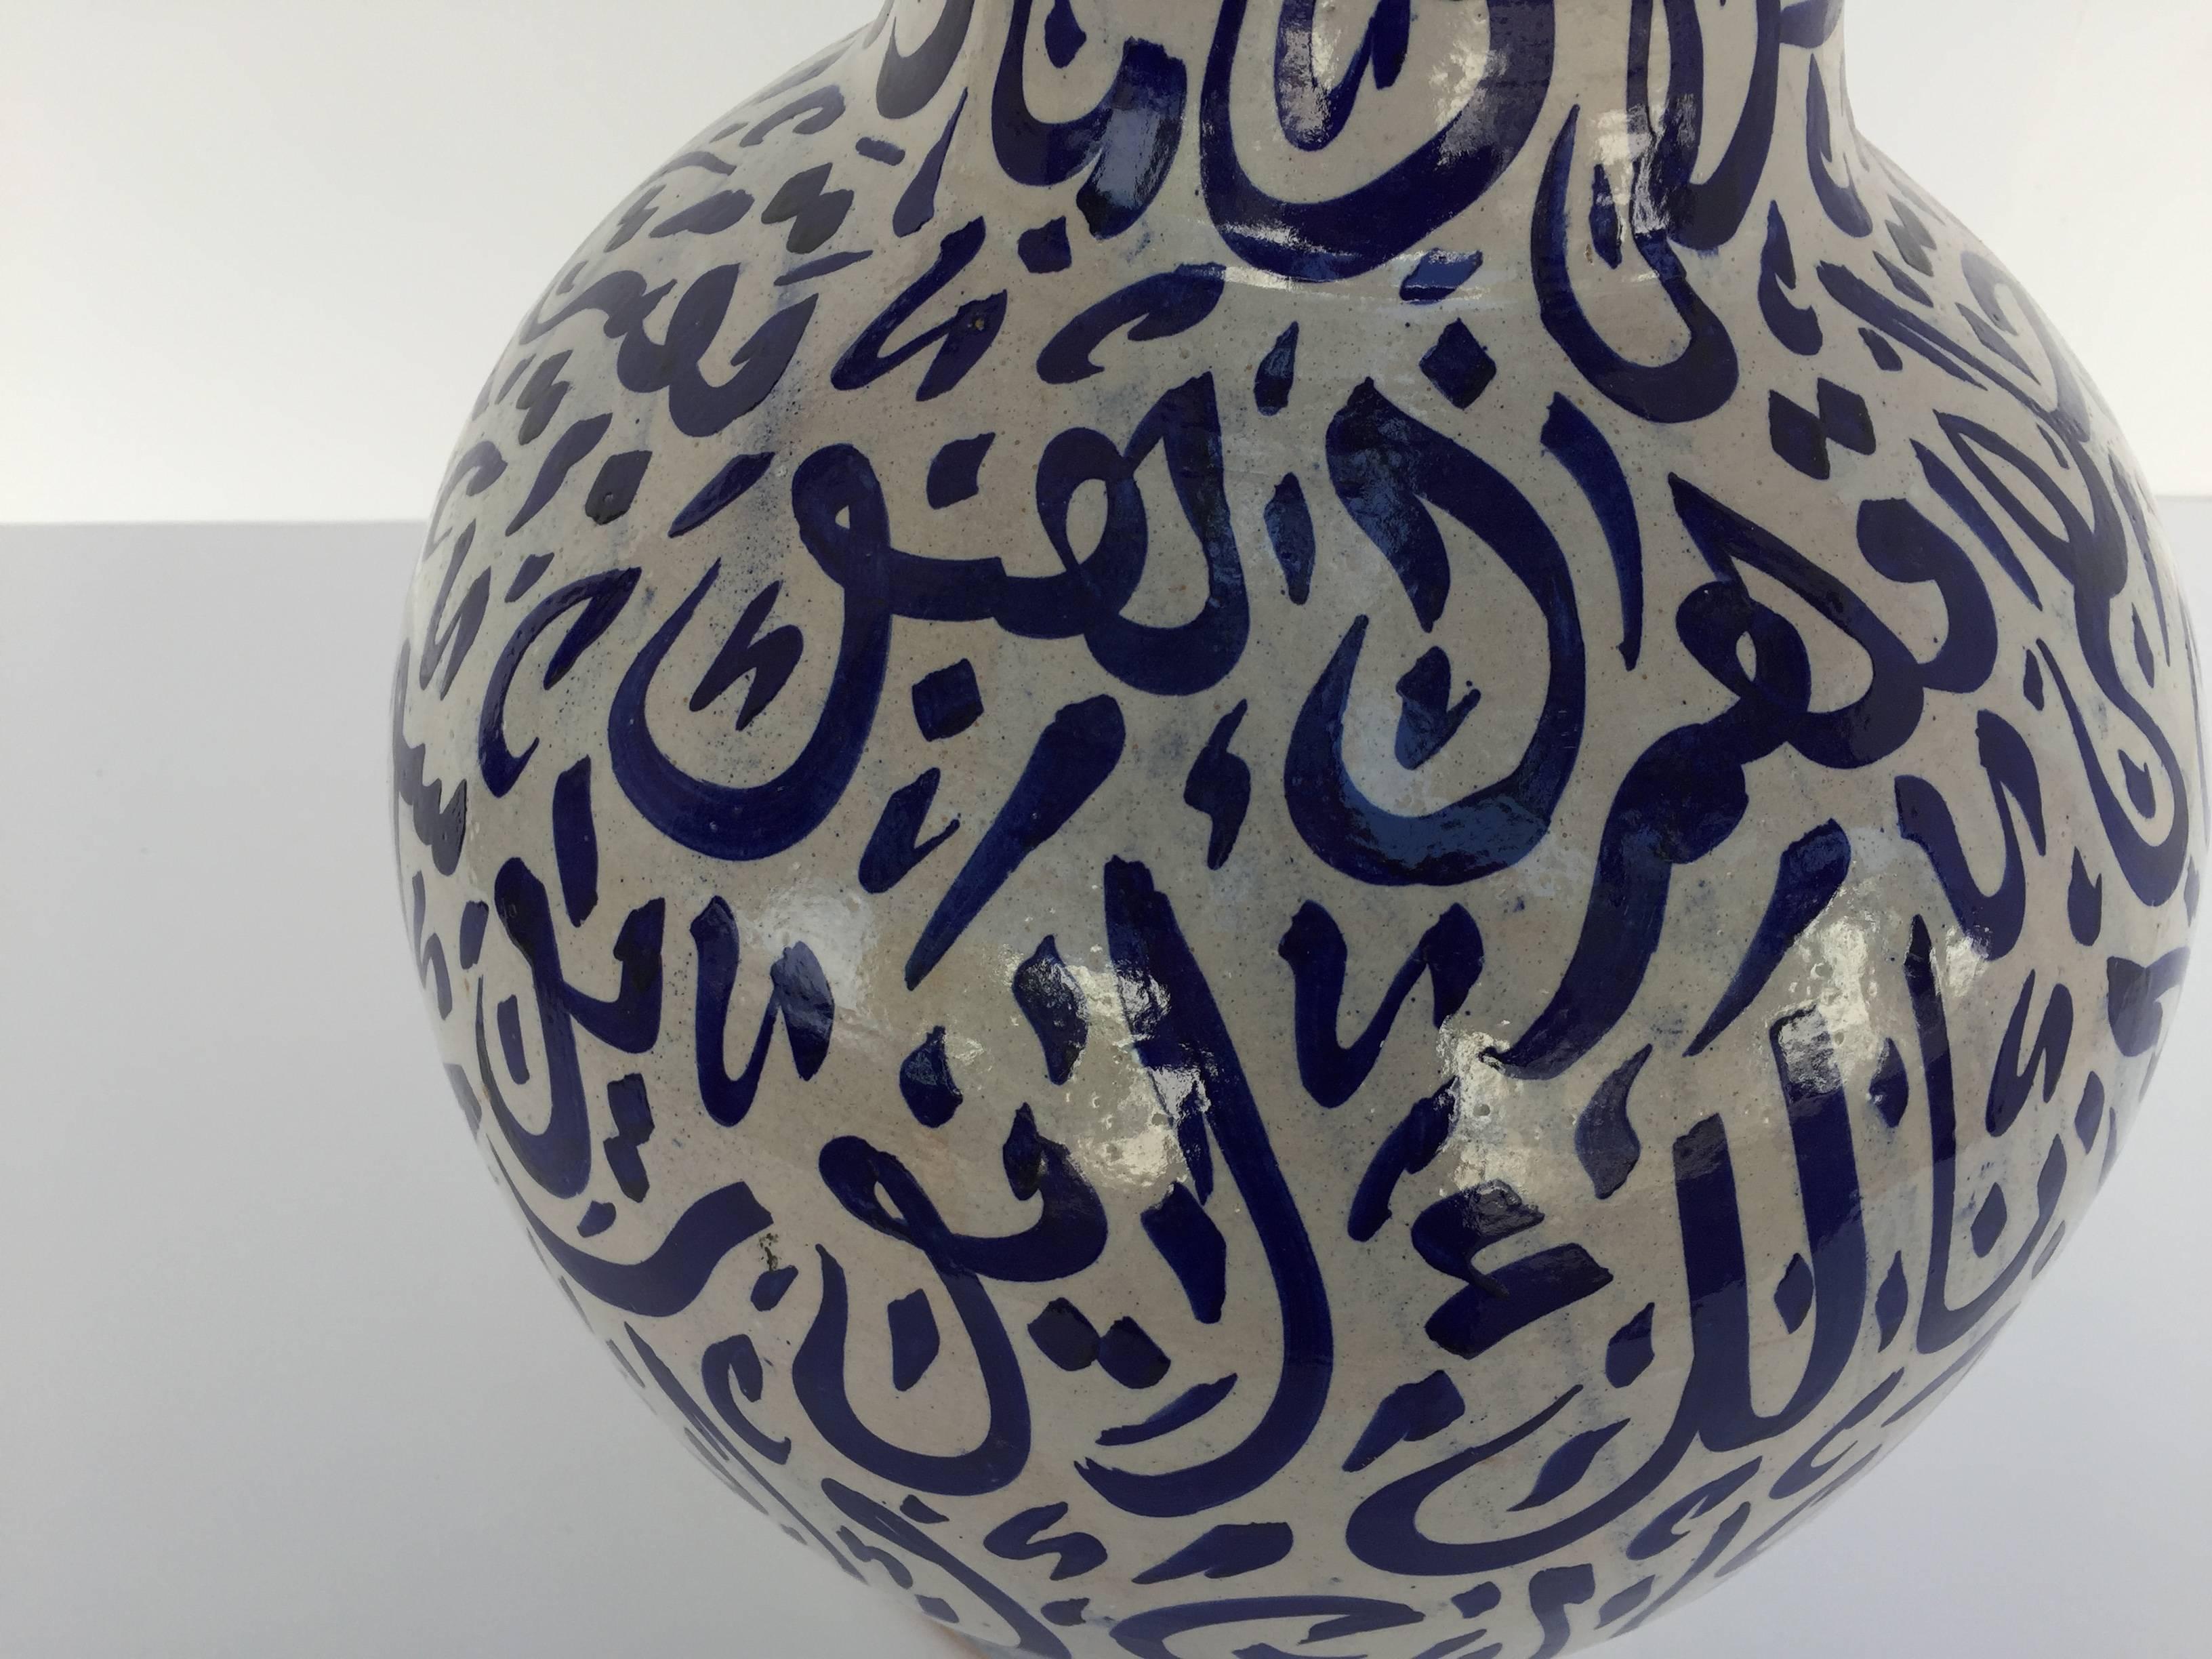 Moorish Large Moroccan Ceramic Vase from Fez with Blue Calligraphy Writing